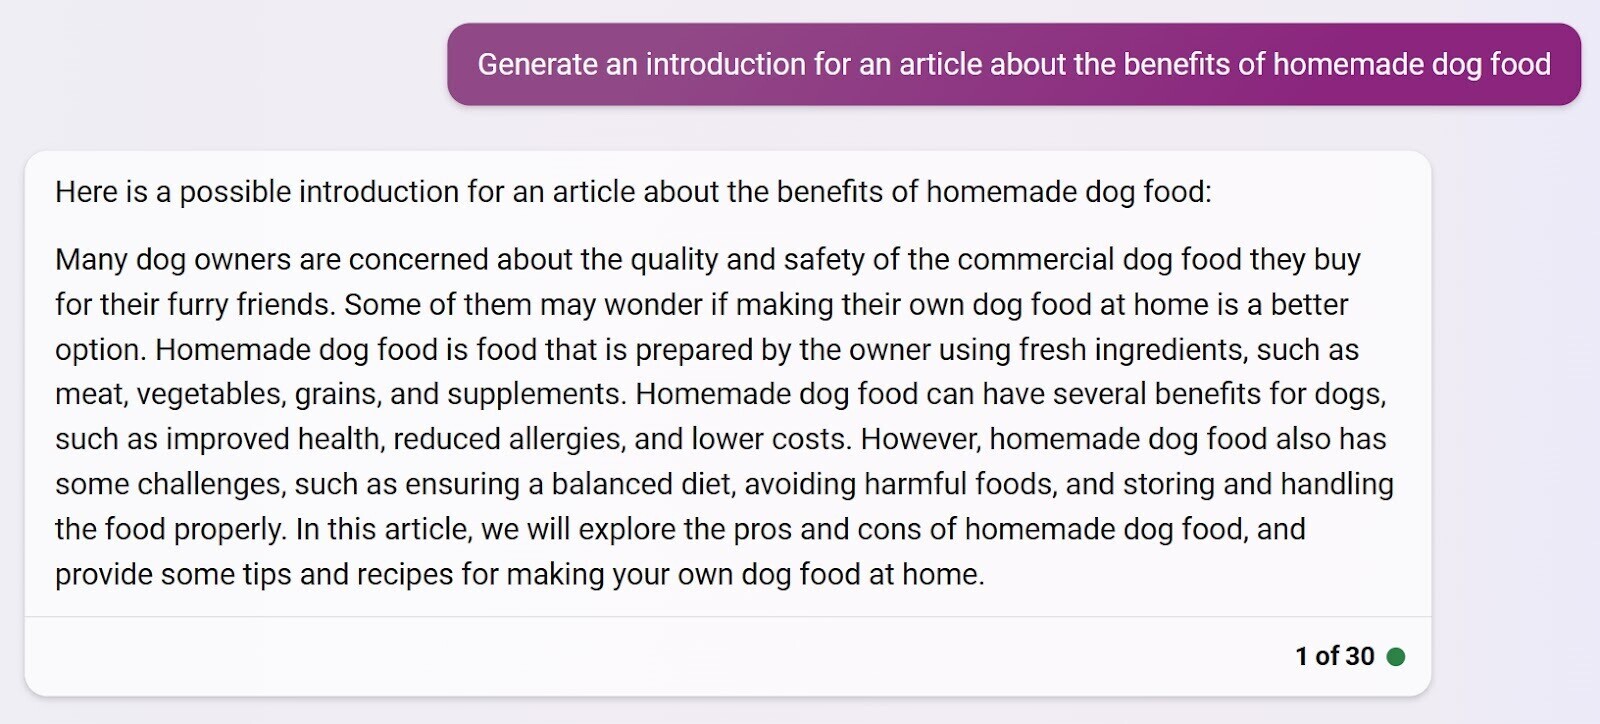 “Generate an introduction for an article about the benefits of homemade dog food” query in Bing